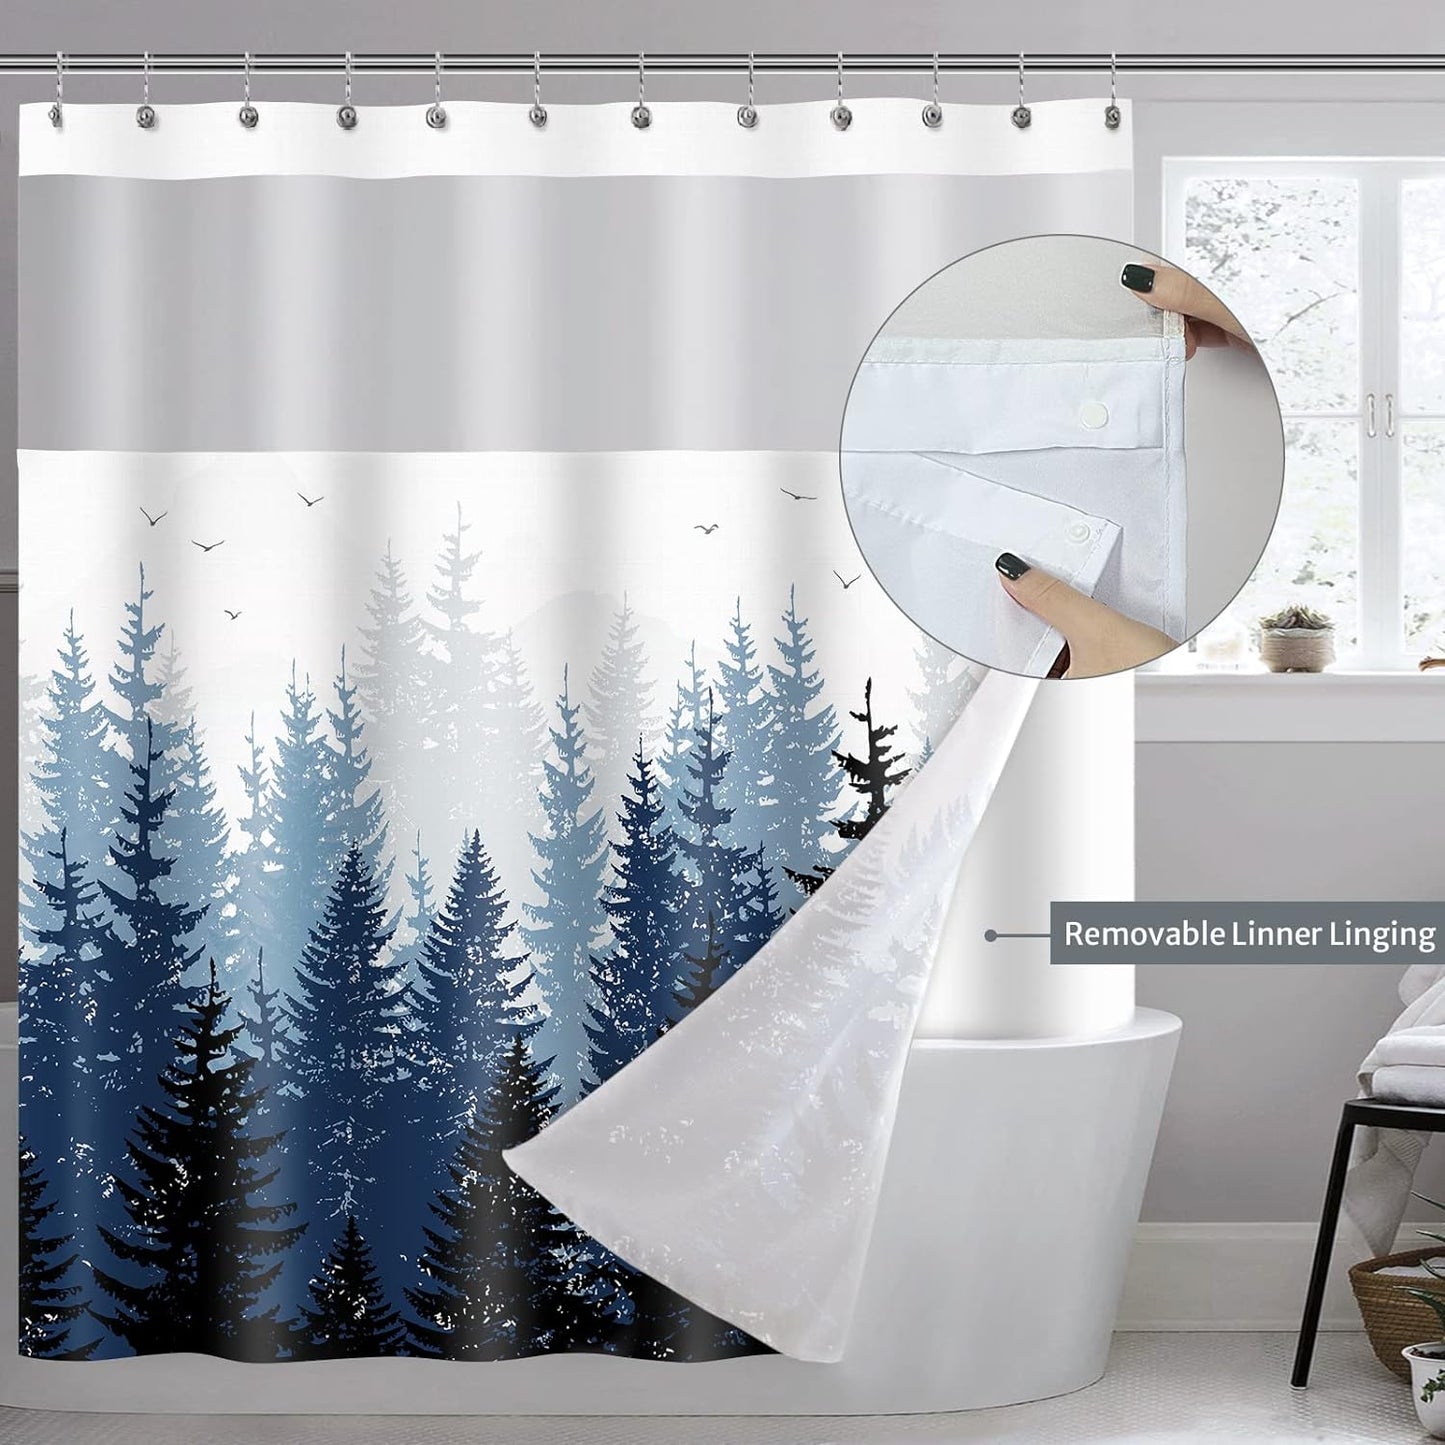 Forest Shower Curtain with snap-in Fabric Liner, Gray Mountain Nature Tree Shower Curtains with Mesh Top Window for Bathroom Decor, Contemporary Bathroom Curtains, See Through Sheer Window, 71x71